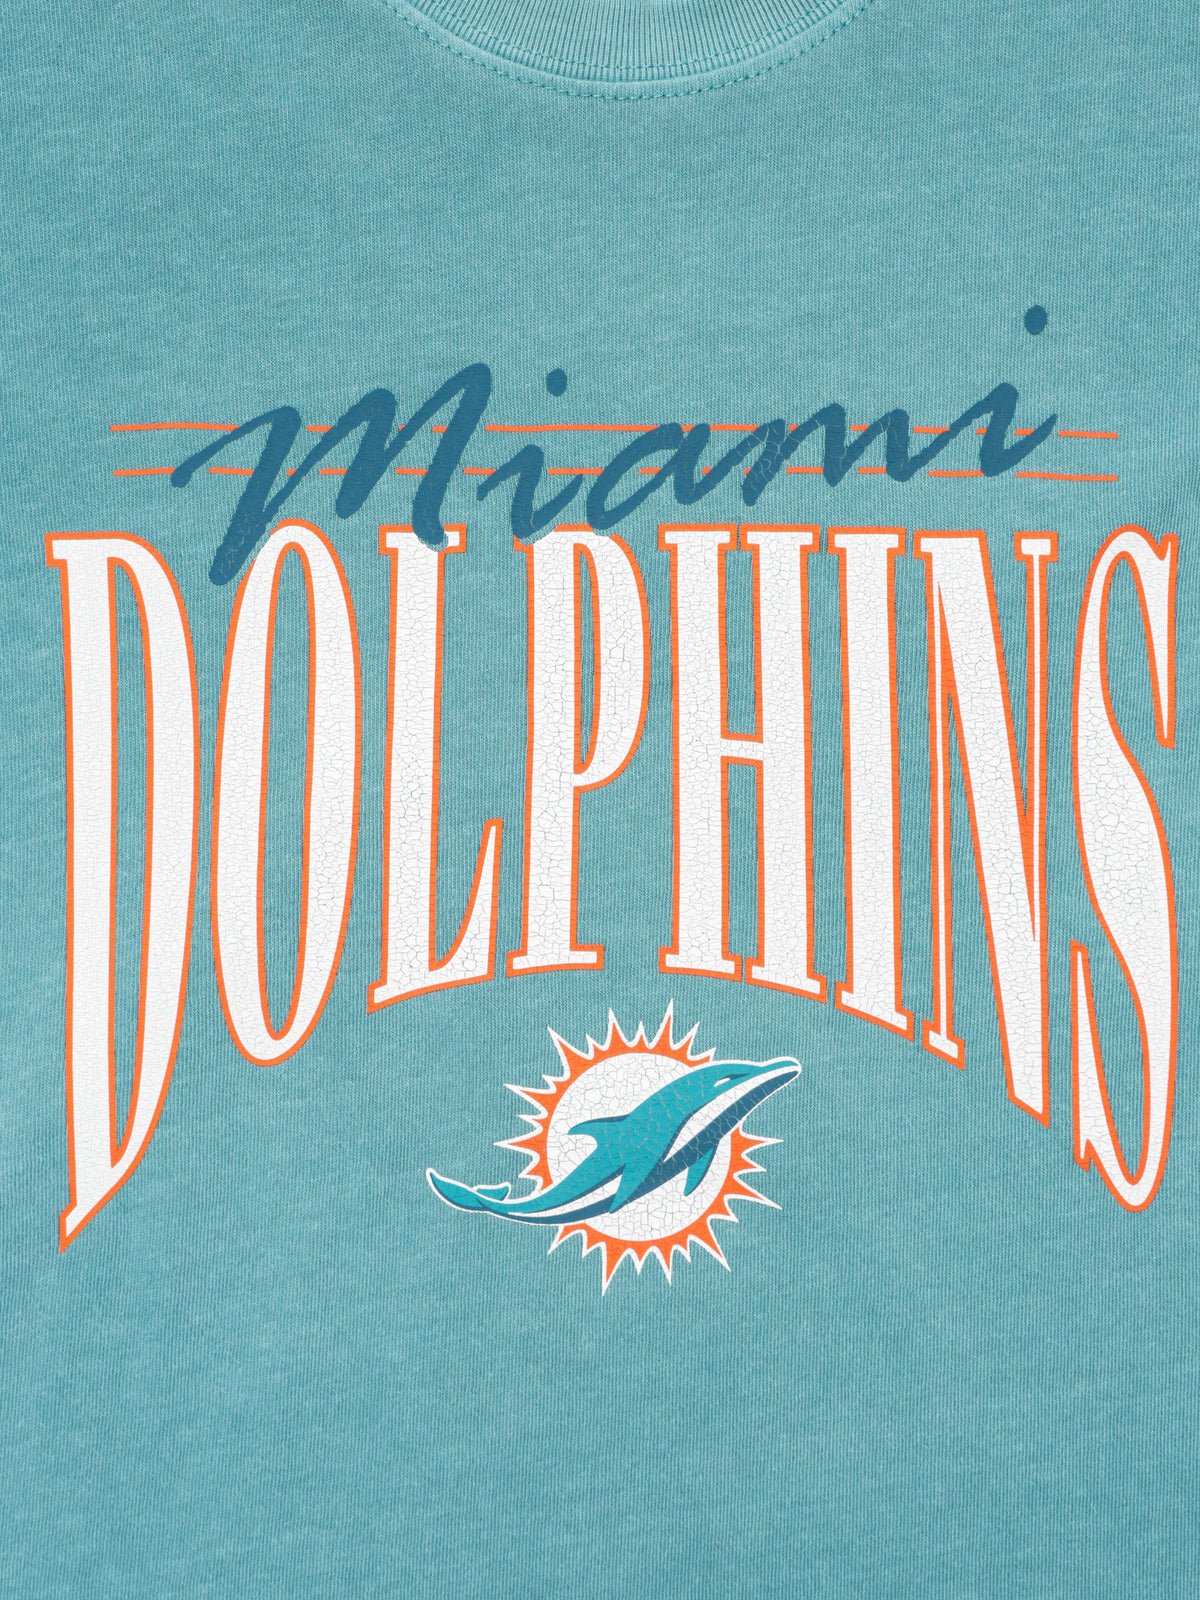 Vintage Arch Boxy Dolphins T-Shirt in Tonic Turq